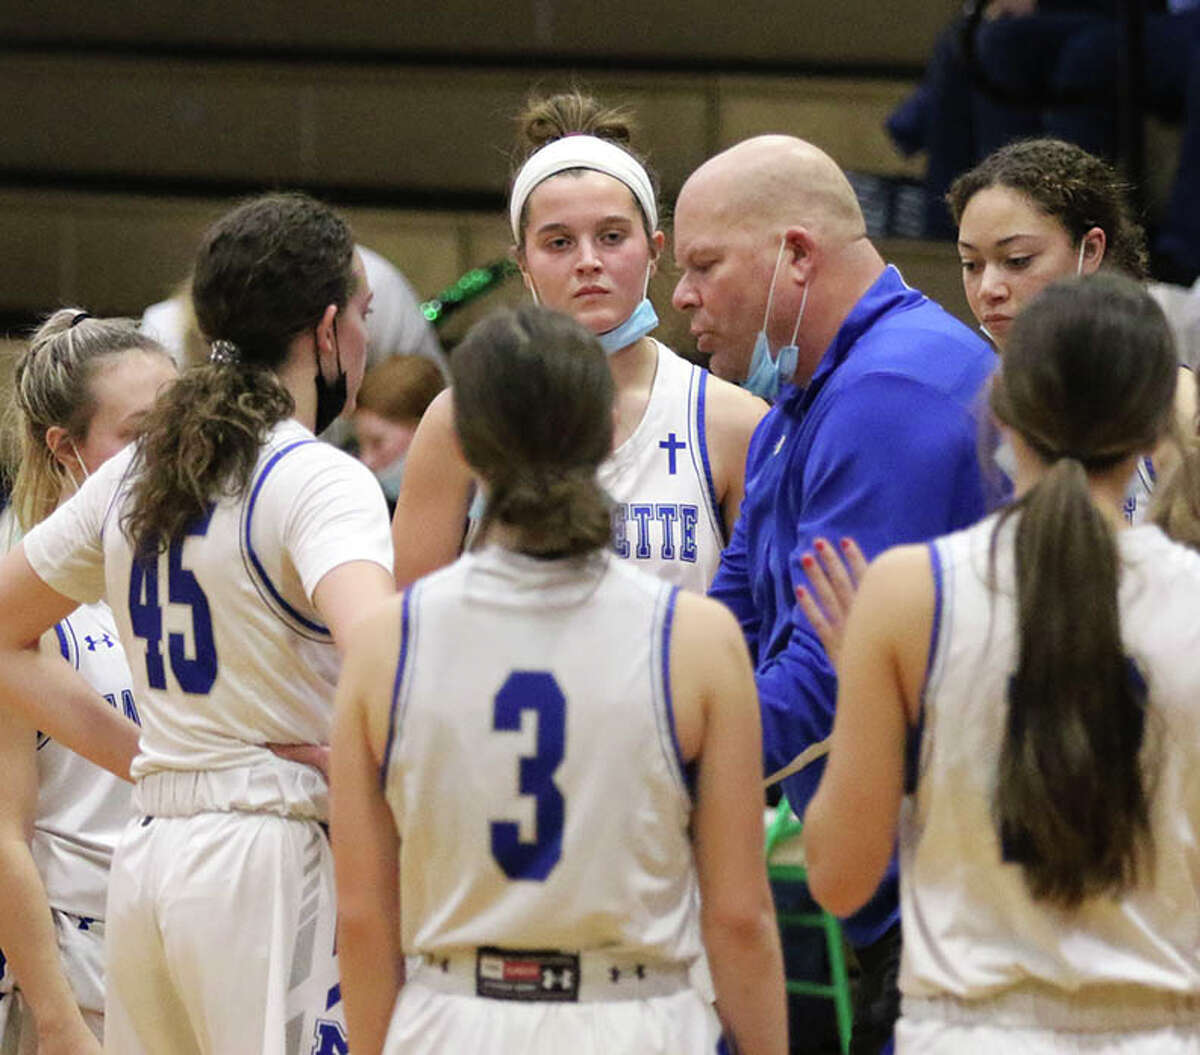 Marquette coach Lee Green talks with his team during a timeout at the Waverly Class 2A Sectional semifinals last season.